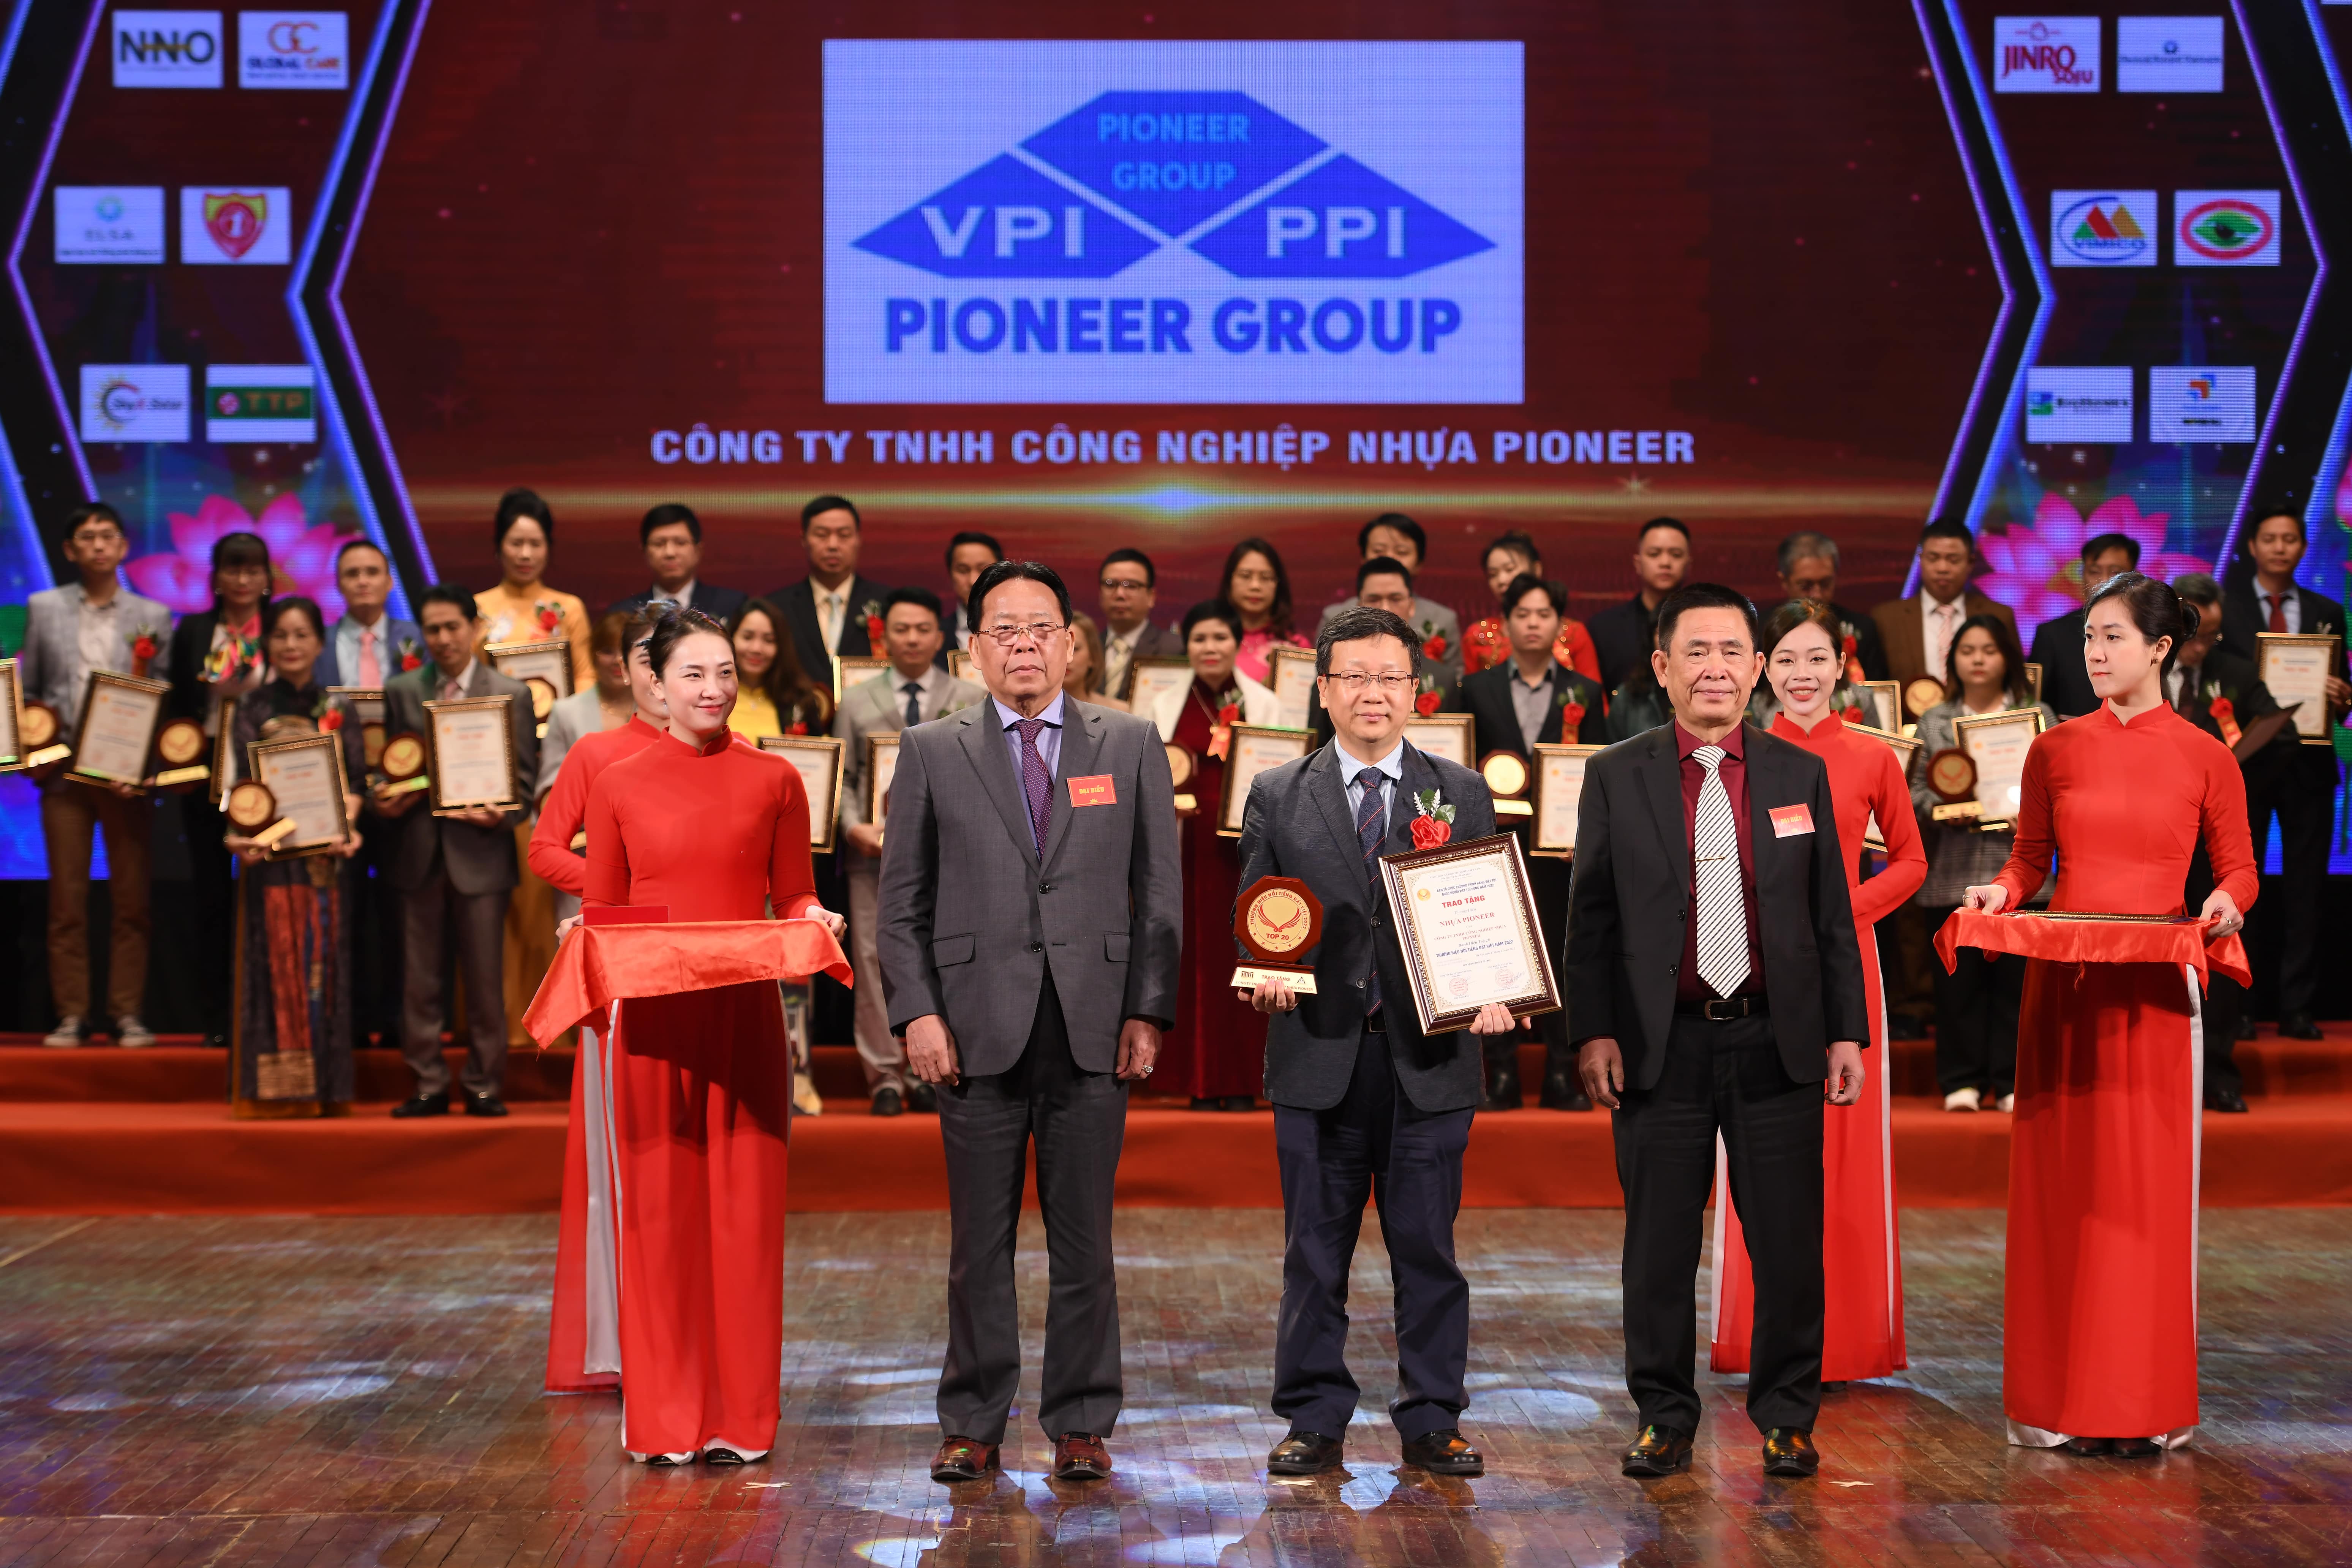 PIONEER PLASTIC INDUSTRIAL COMPANY LIMITED